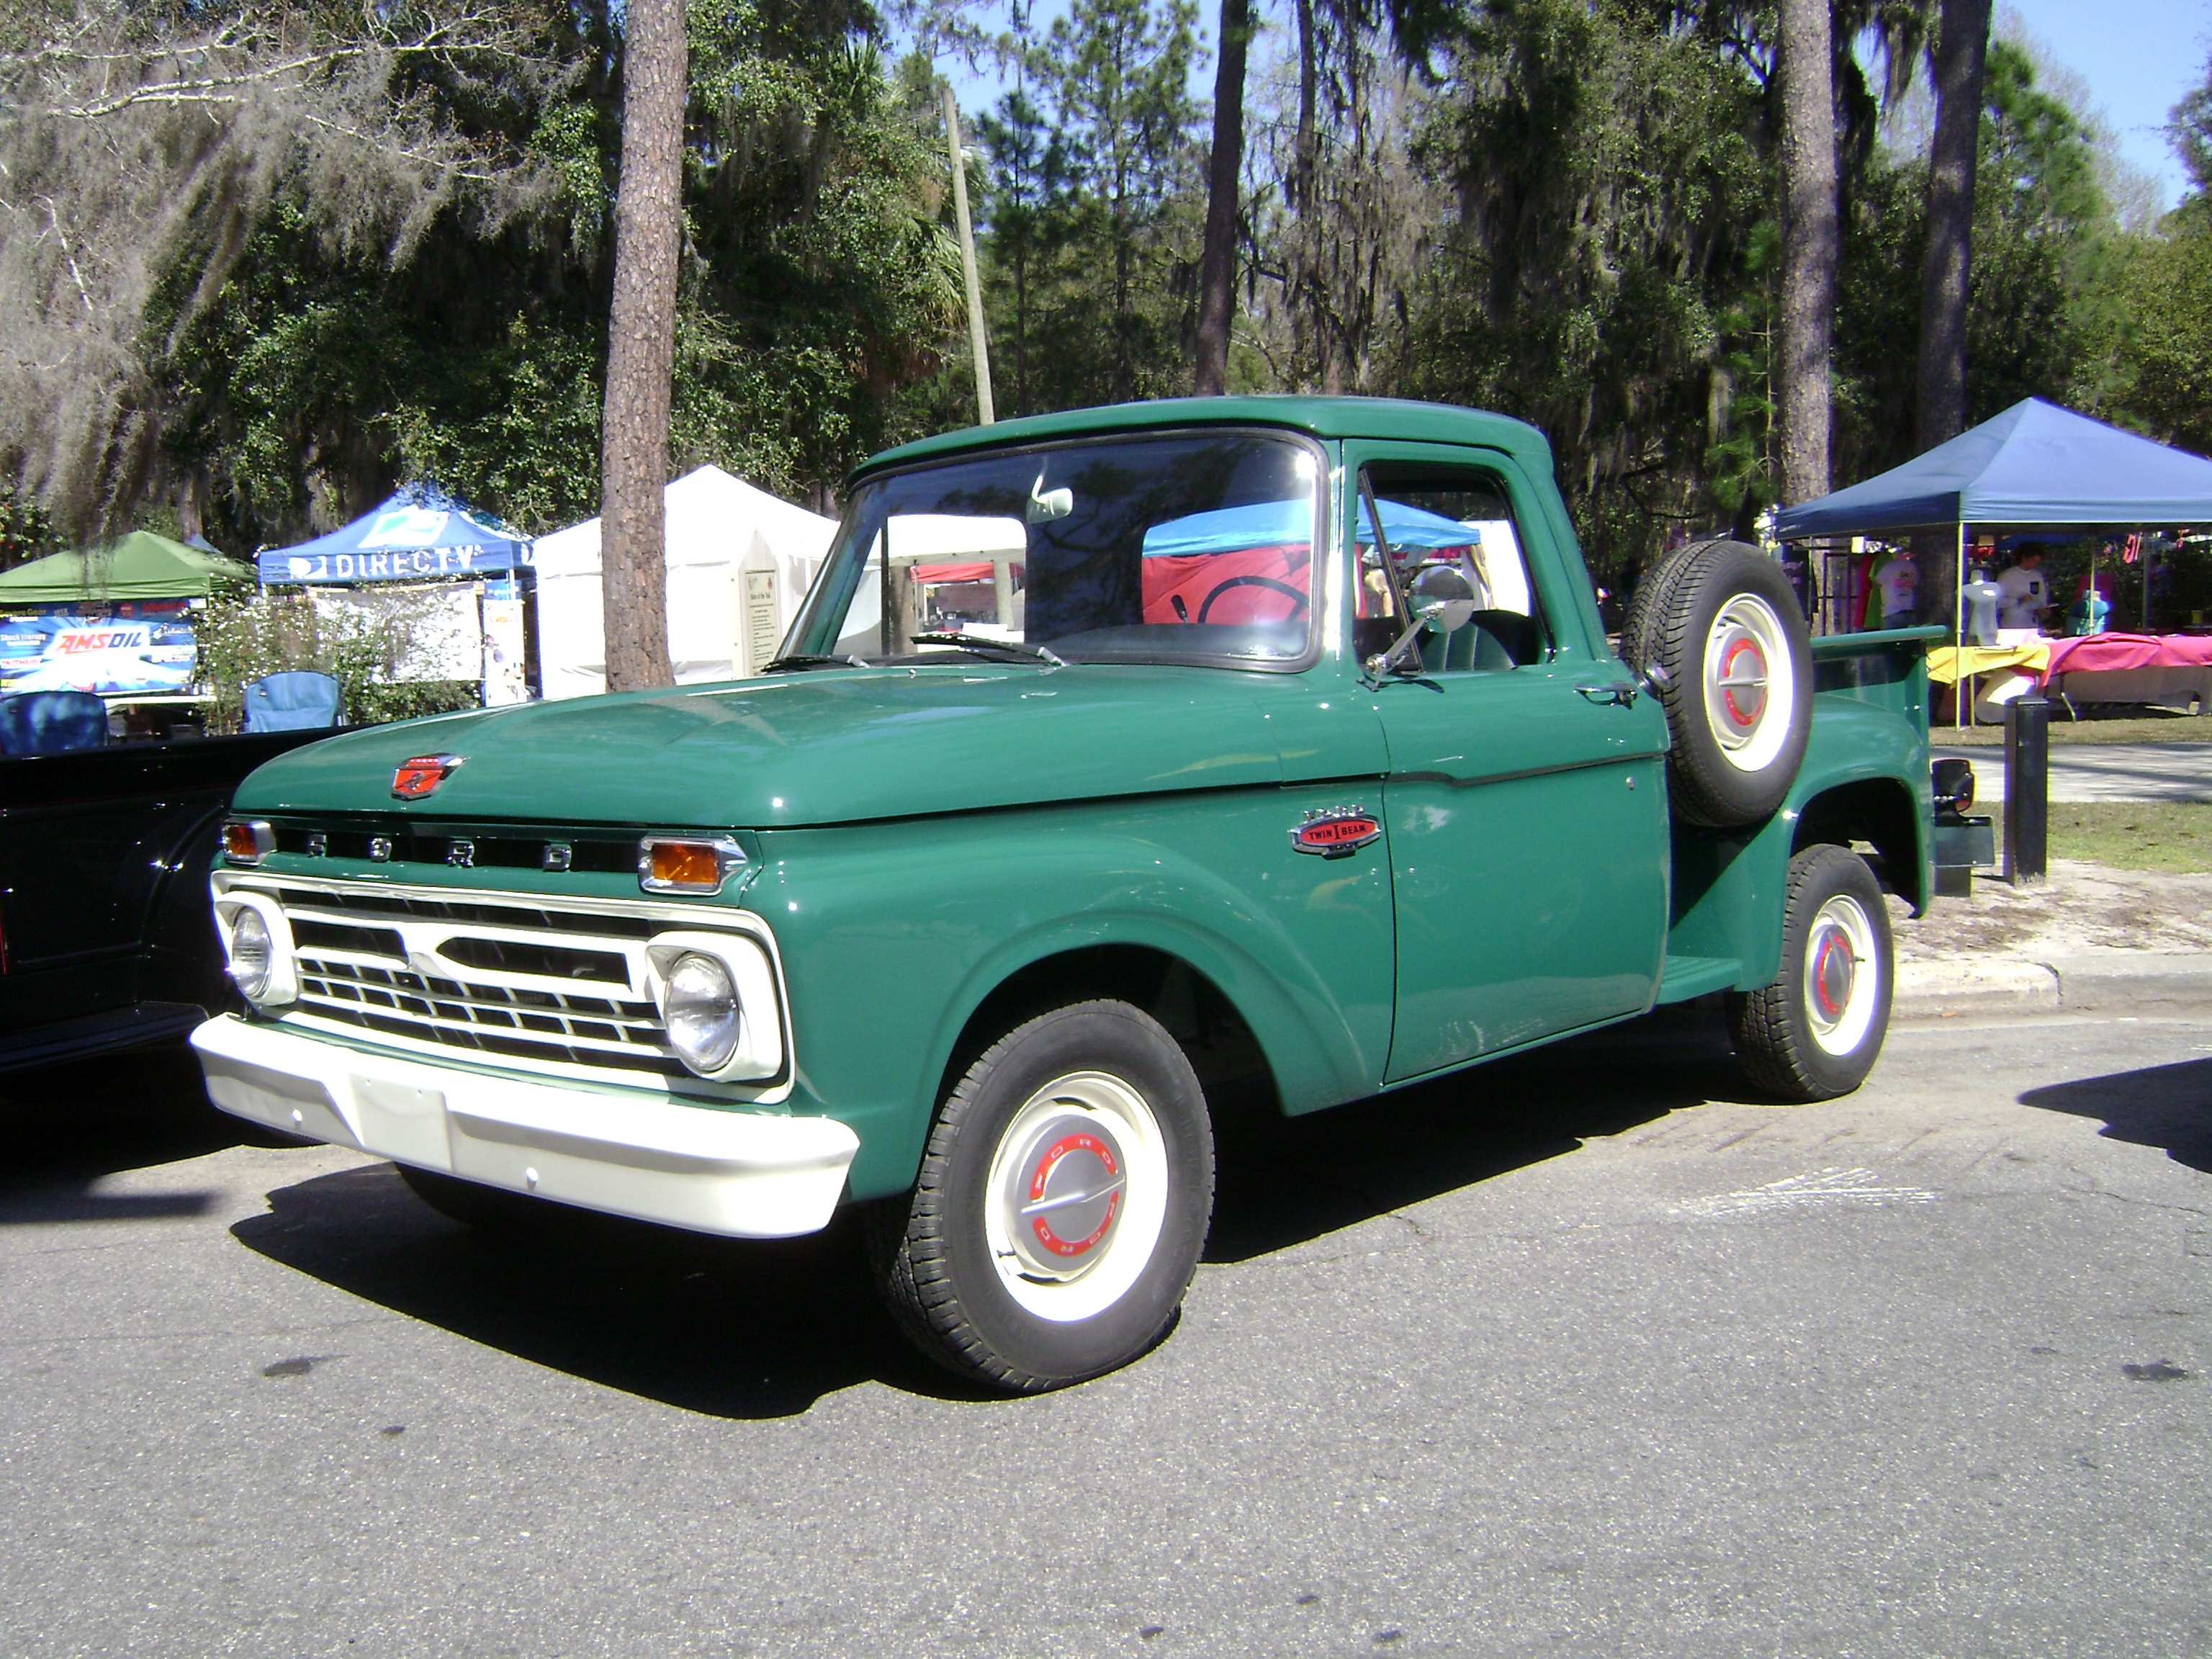 1966 Ford f100 history #1